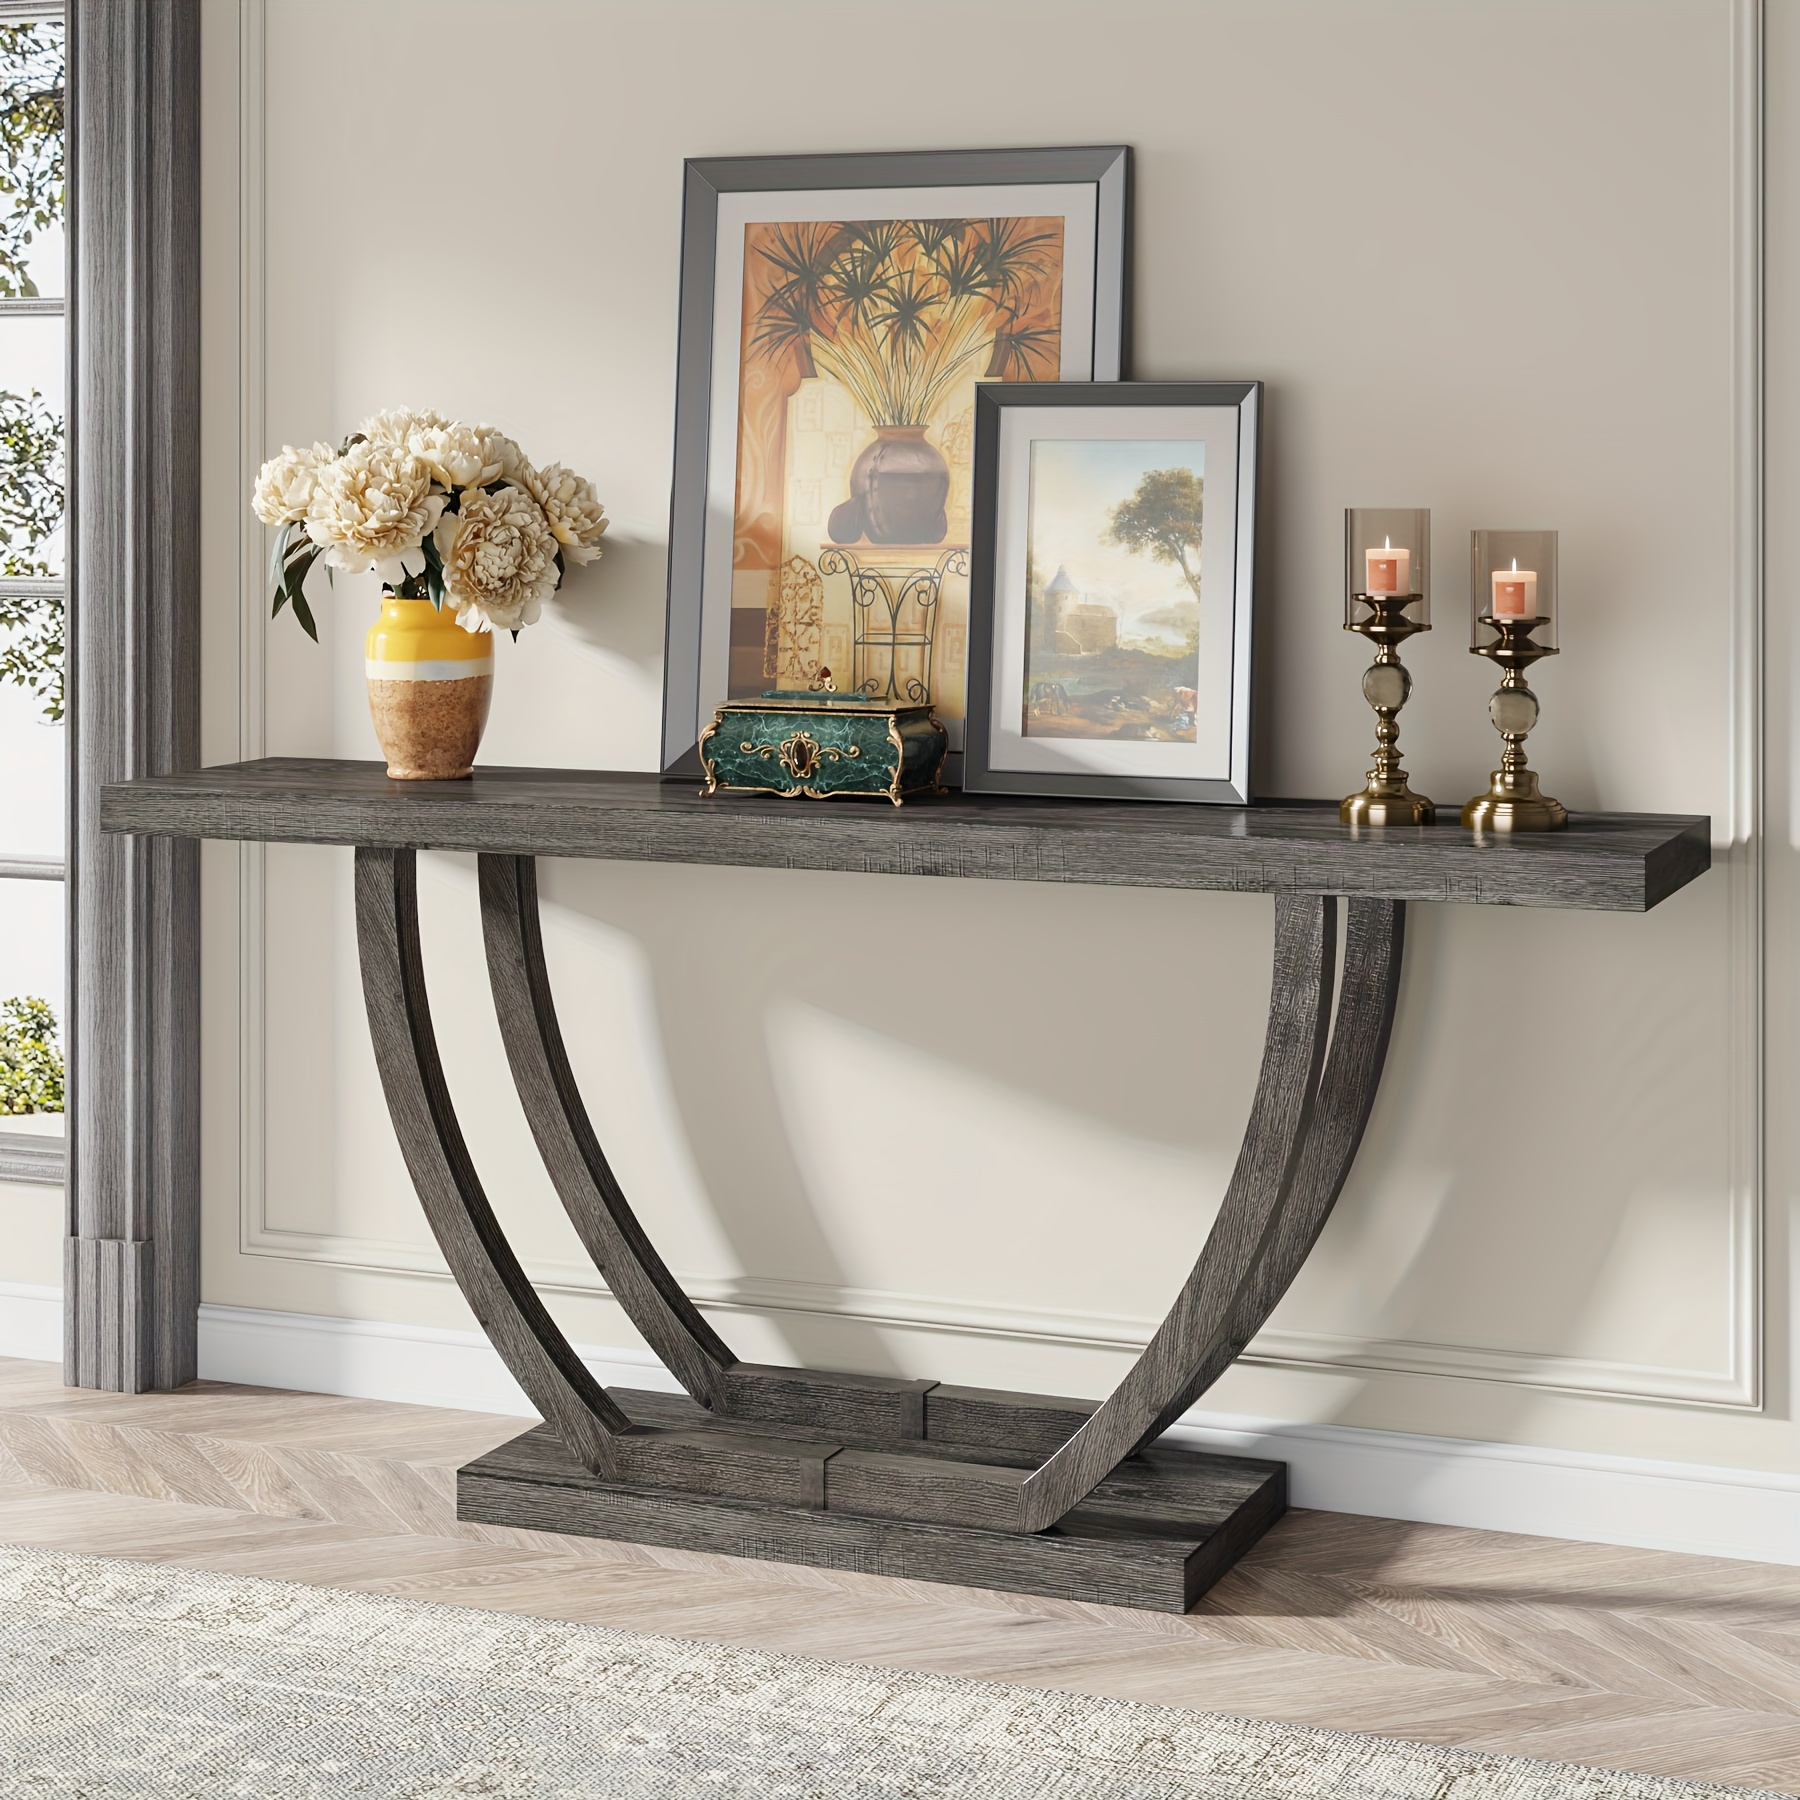 

63 Inches Farmhouse Console Table For Entryway, Wood Entry Foyer Table For Entrance, Narrow Long Sofa Table Behind Couch With Metal Legs For Living Room